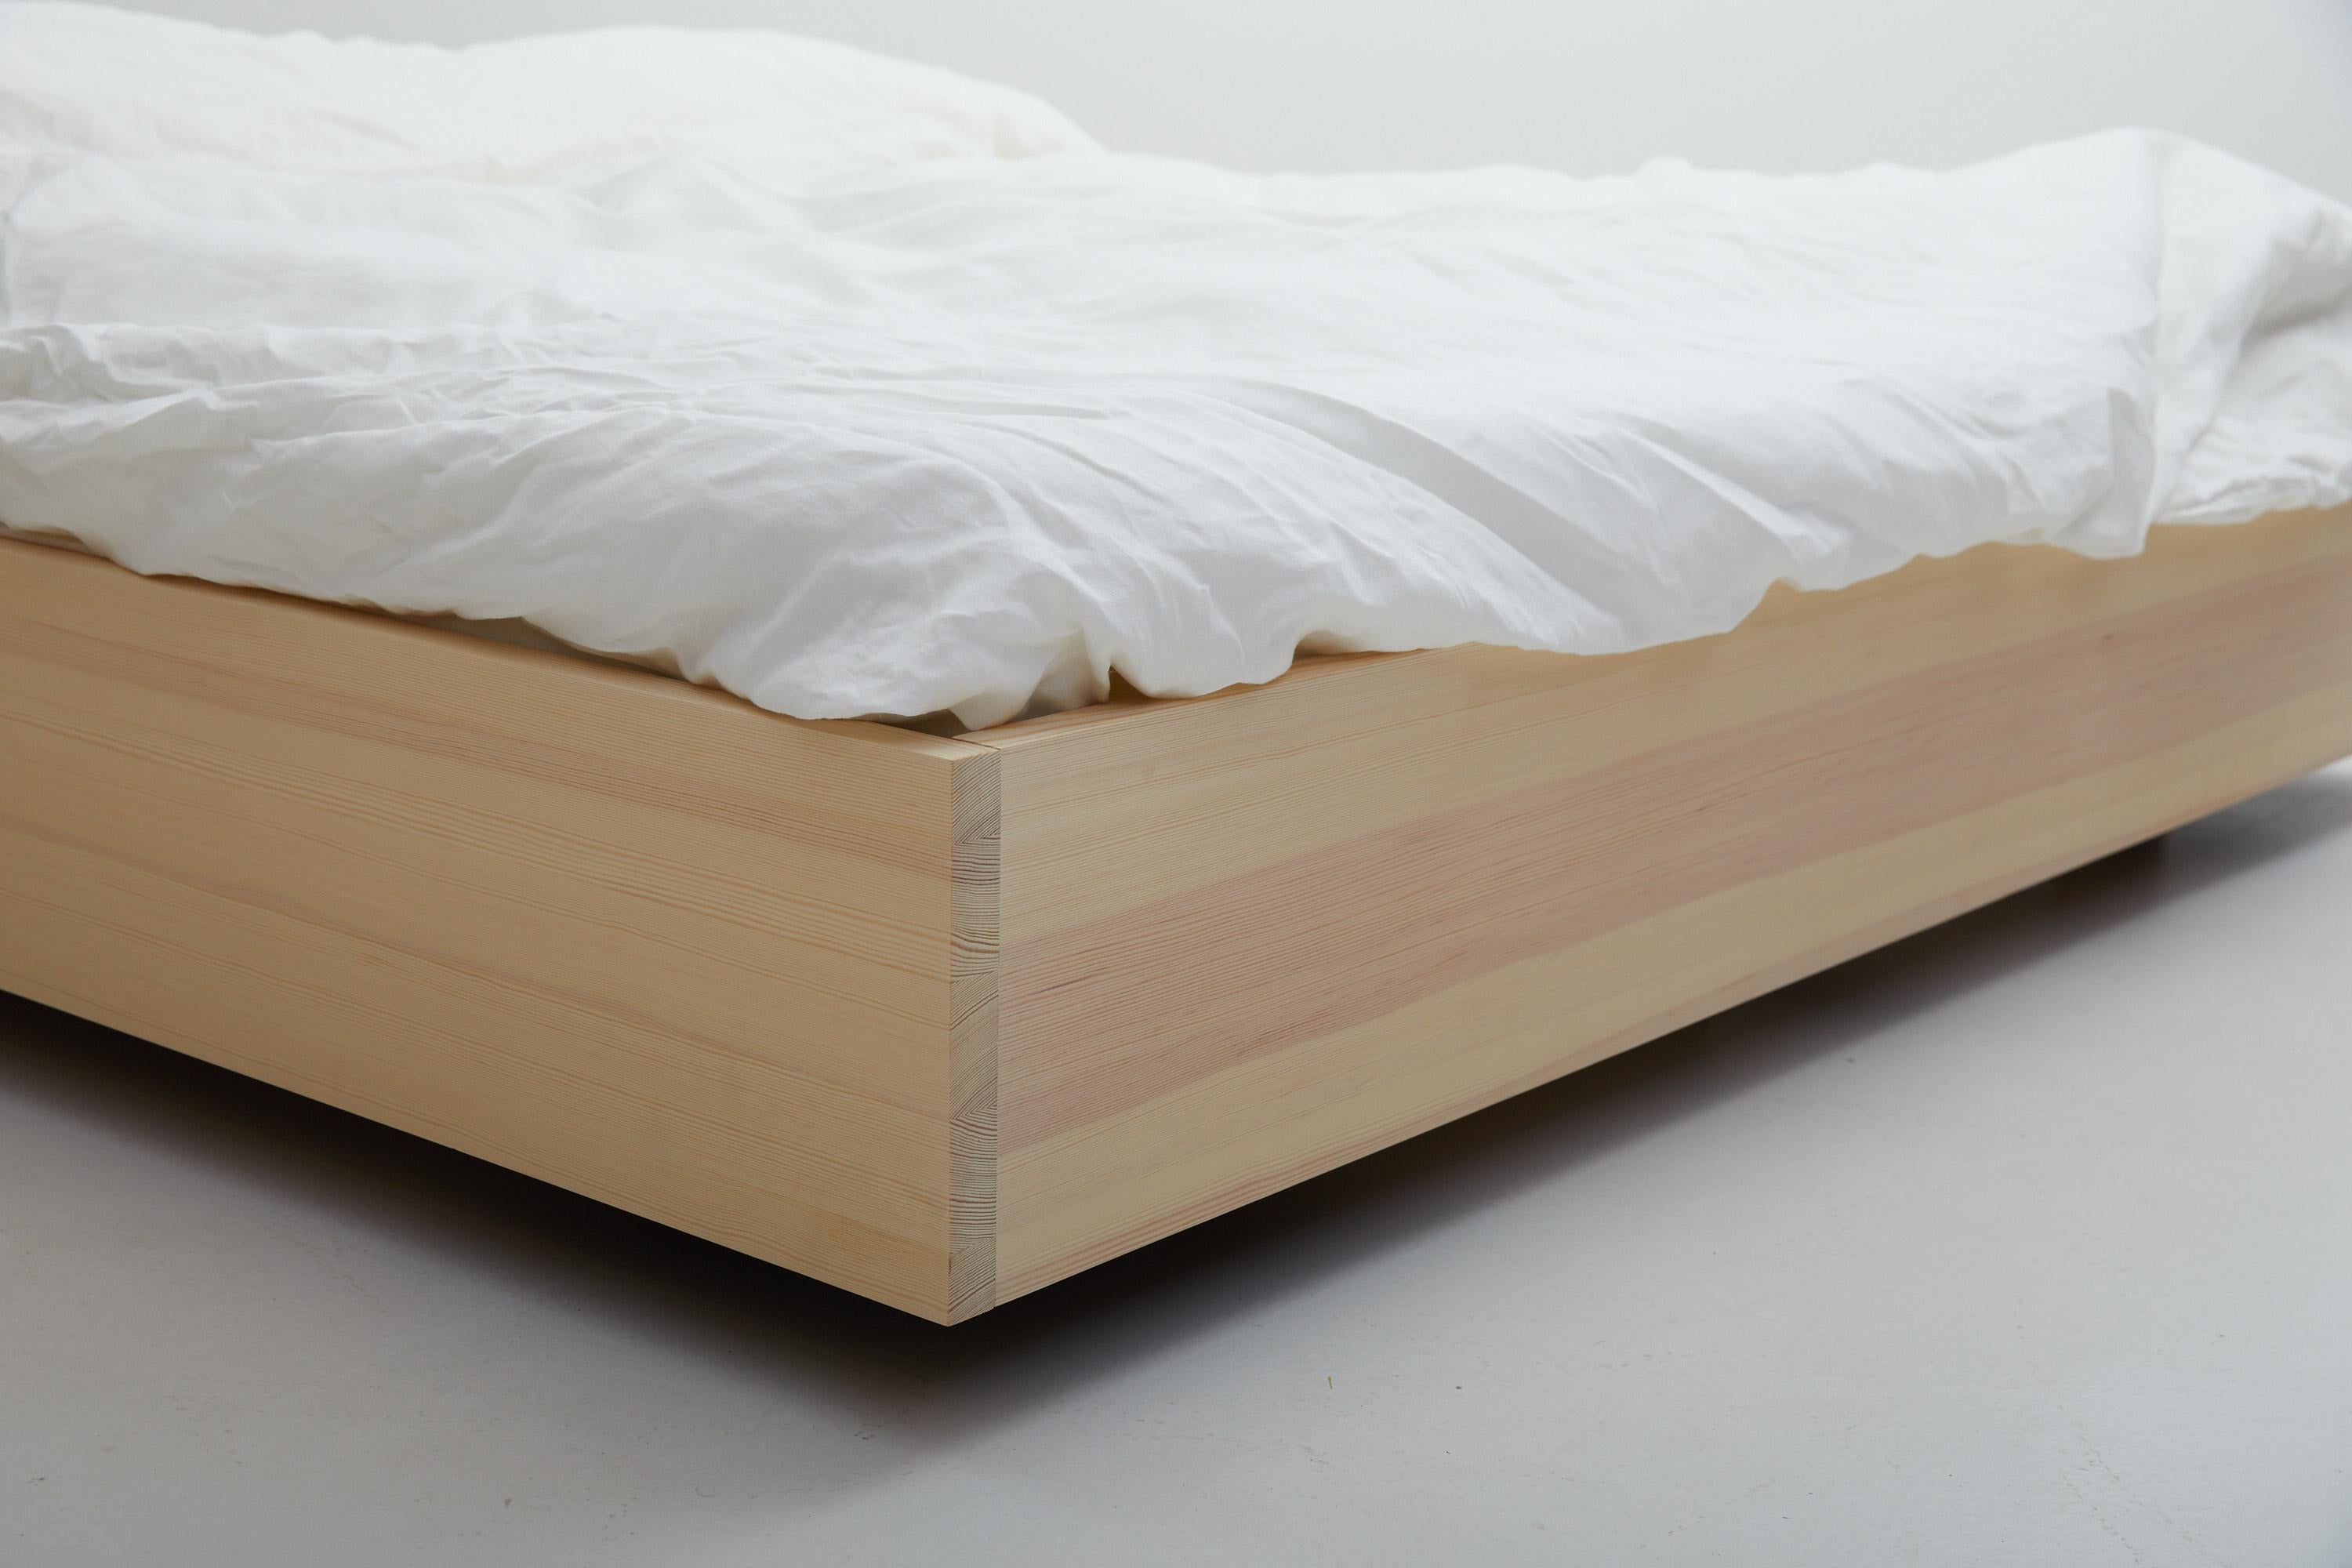 The Floating Bed

A sense of hovering freely inspired cabinet maker Axel Wannberg to design The Floating Bed – a distinct bedroom piece in massive Swedish Pine.
Pine wood is a beautiful and versatile material that can add warmth and character to any